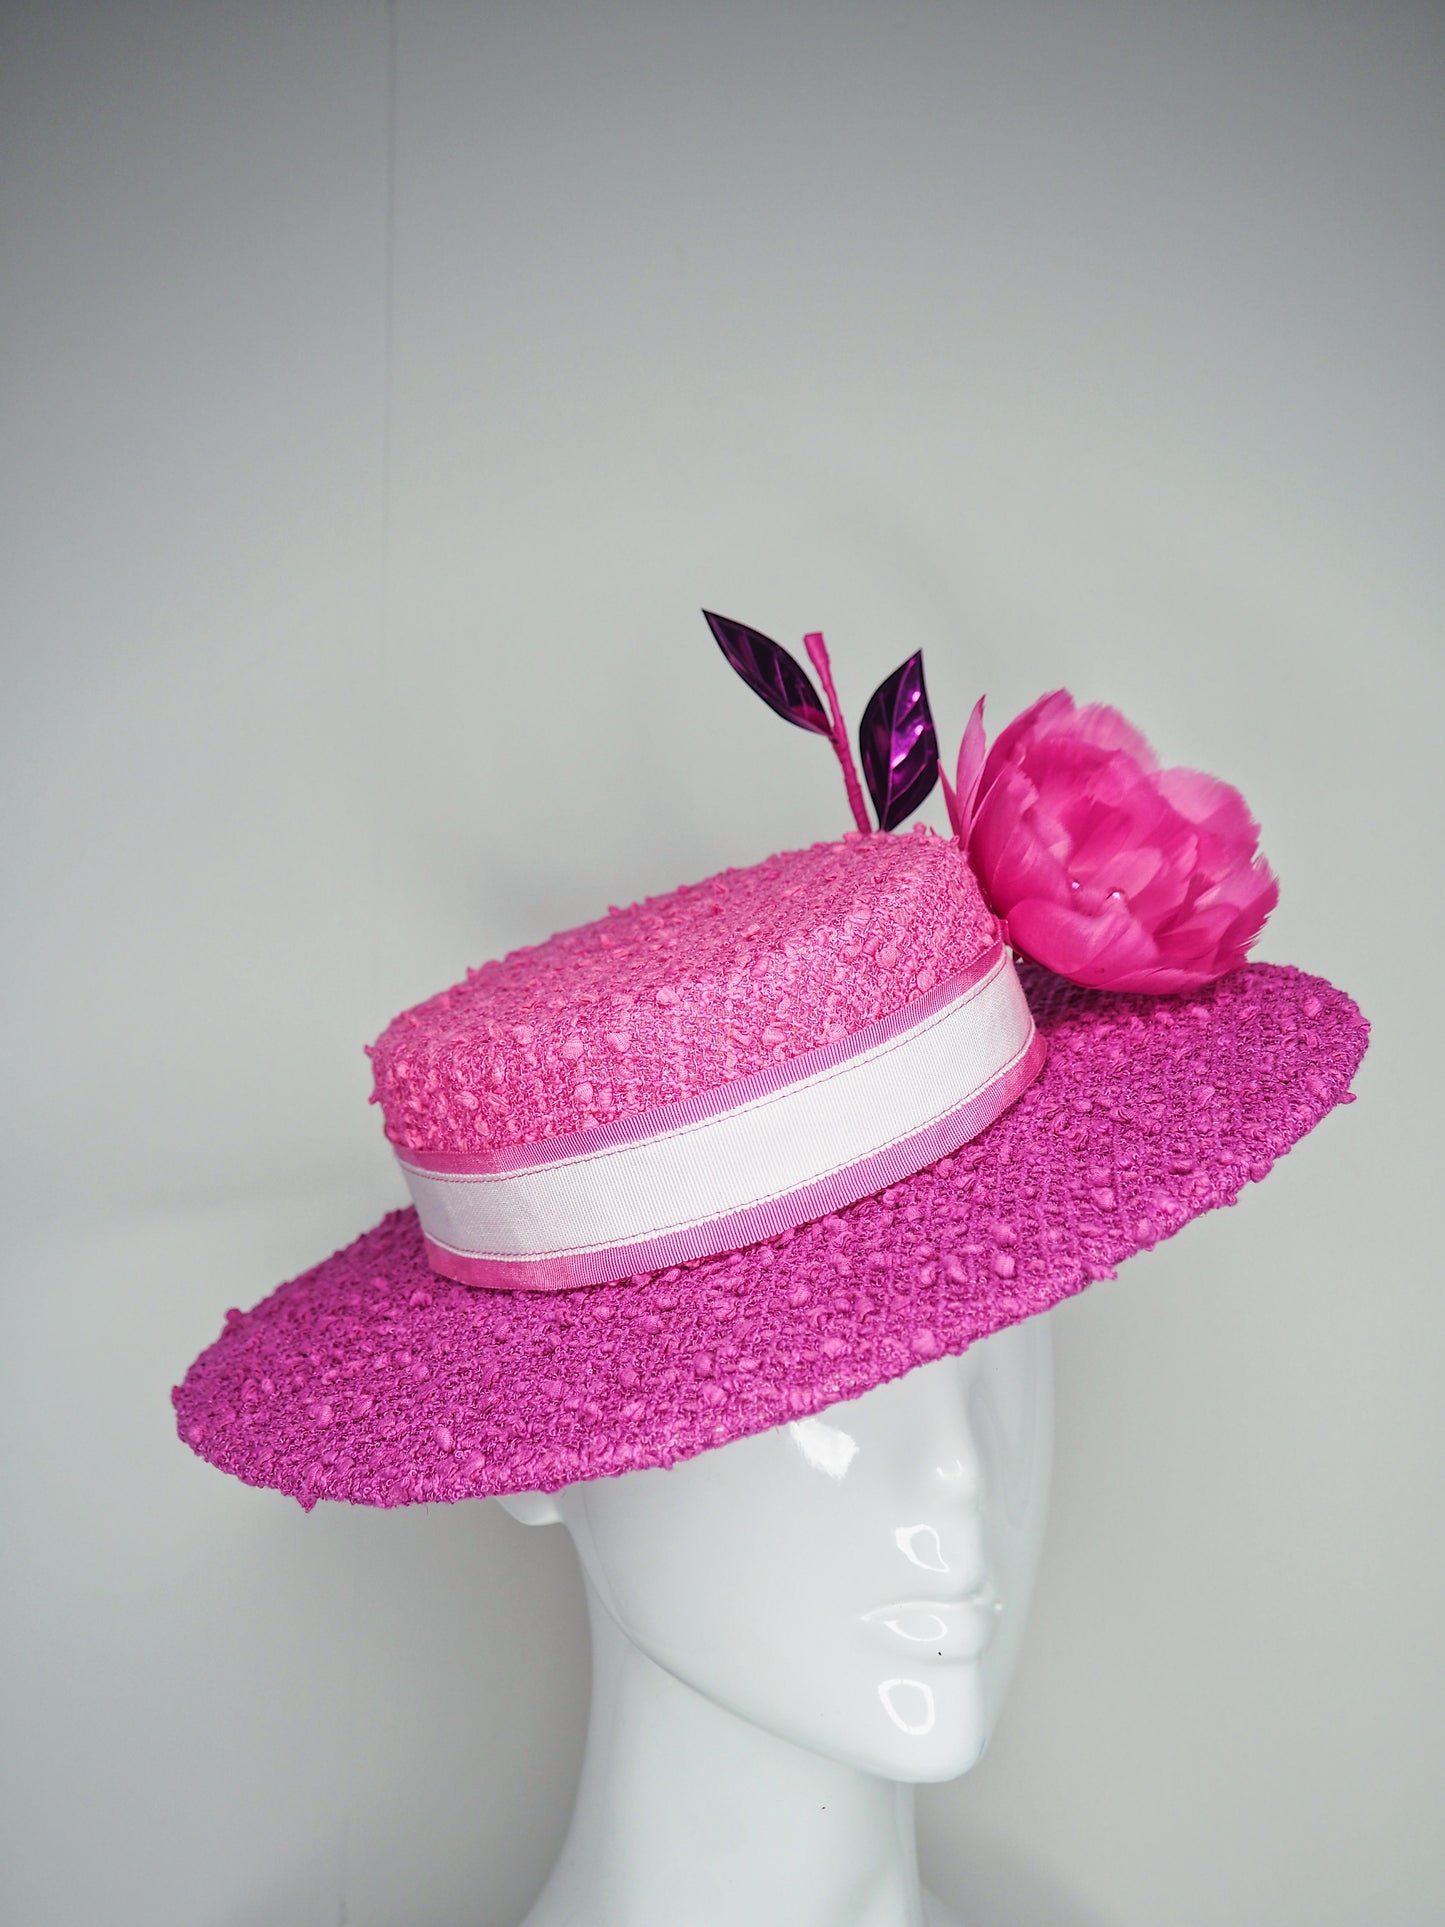 Pretty as a picture - Pink and Magenta Dyed Boucle Boater with removable feather flower.